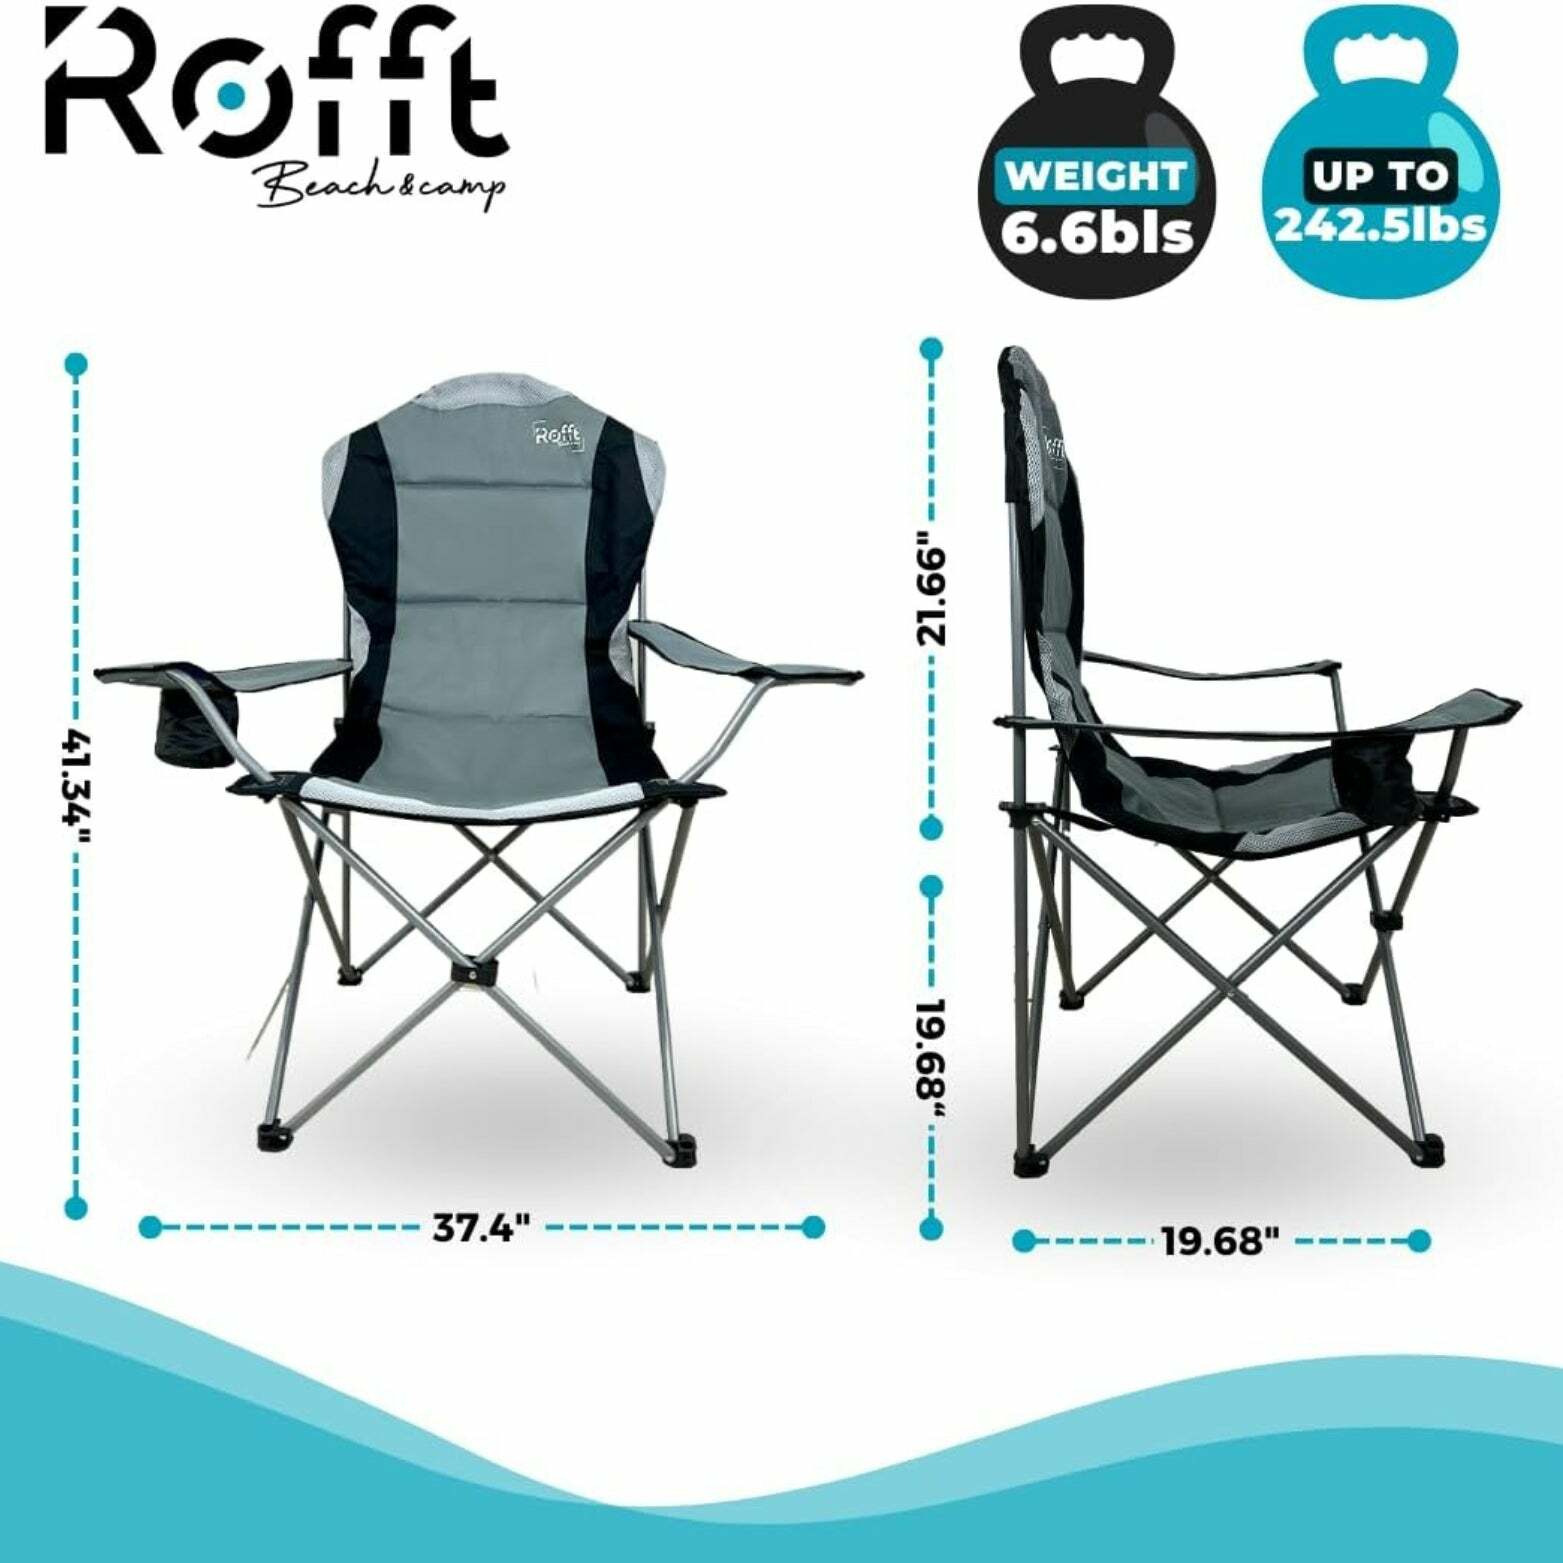 ROFFT Portable Camping Chair with Cooler - Collapsible, Comfort Padded, Cup Holder, Carry Bag Included, Grey